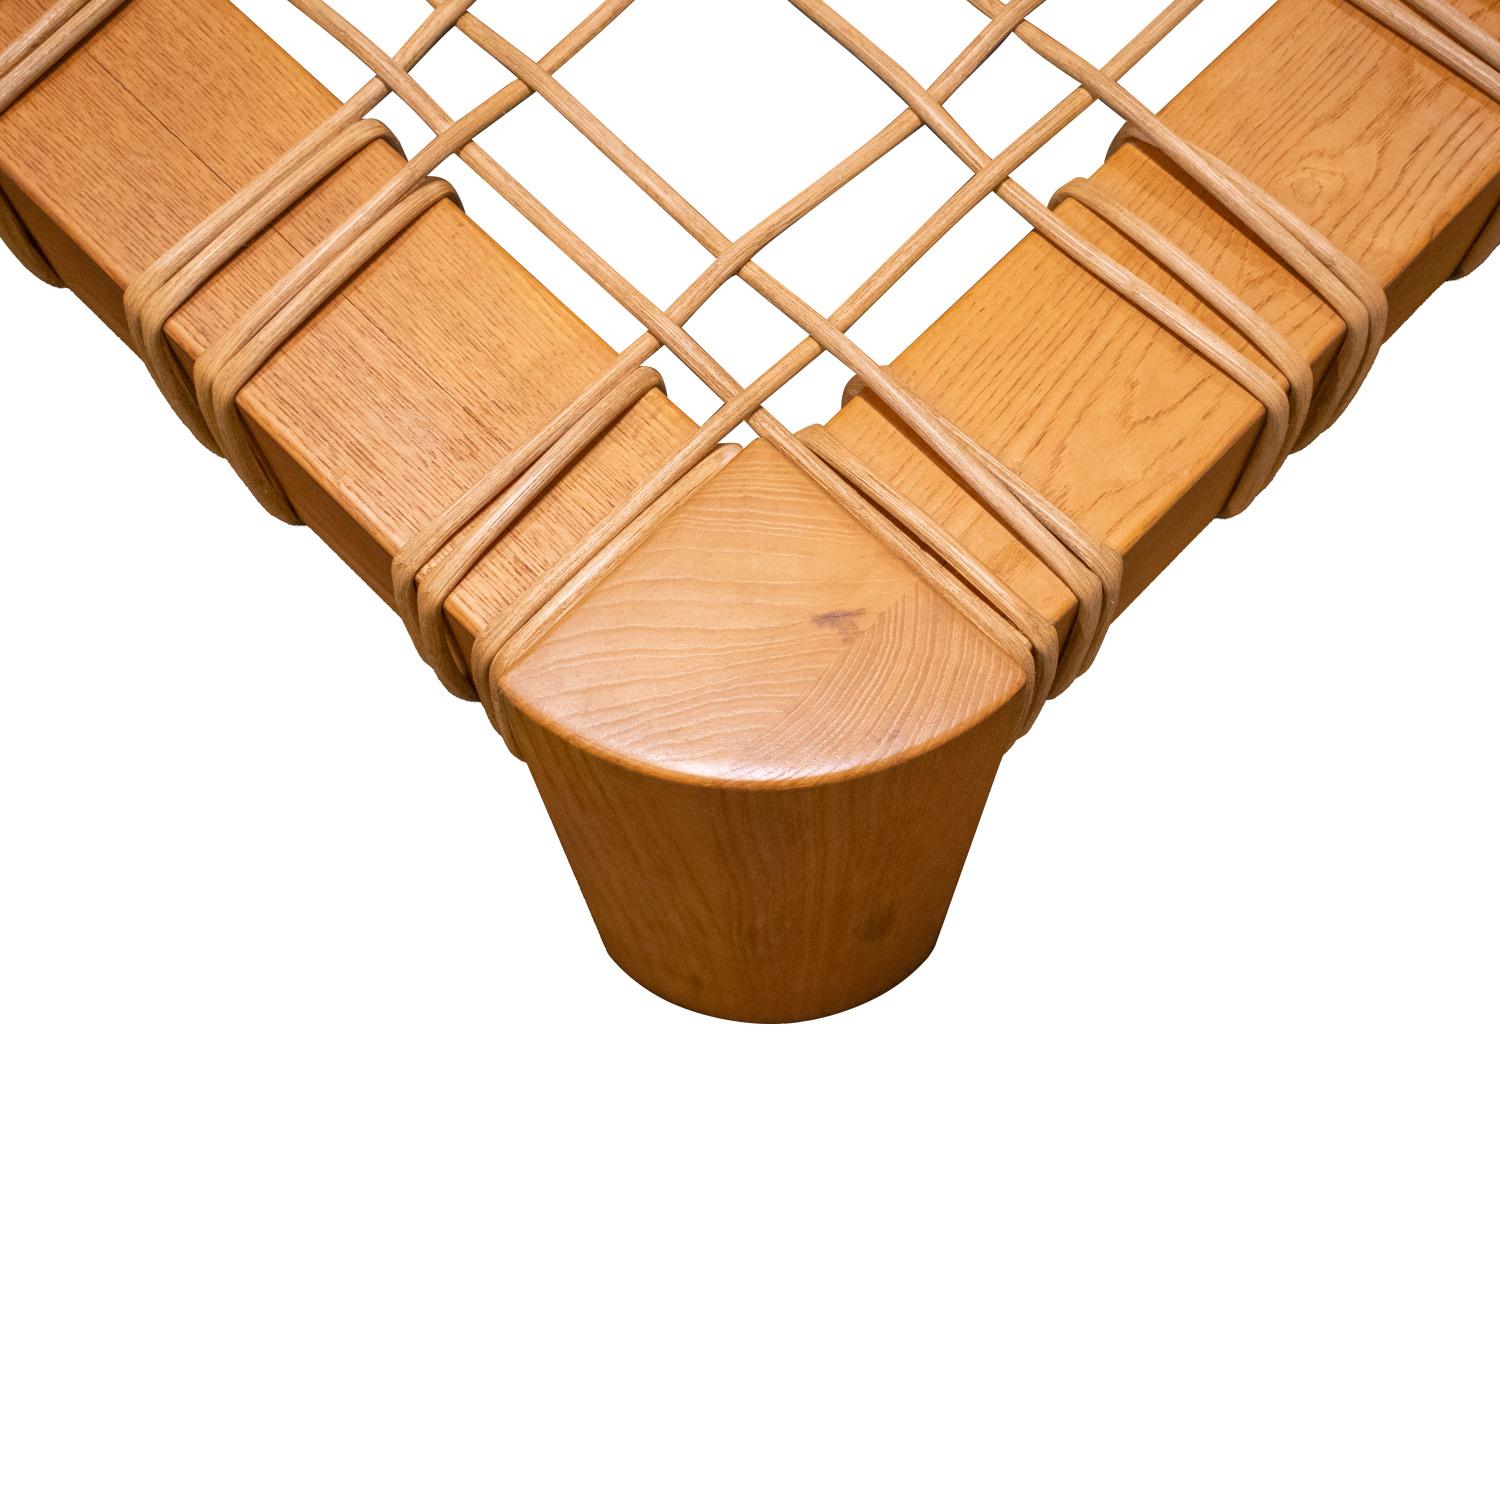 Hand-Crafted Karl Springer Rare and Impressive Coffee Table with Woven Rattan 1980s For Sale